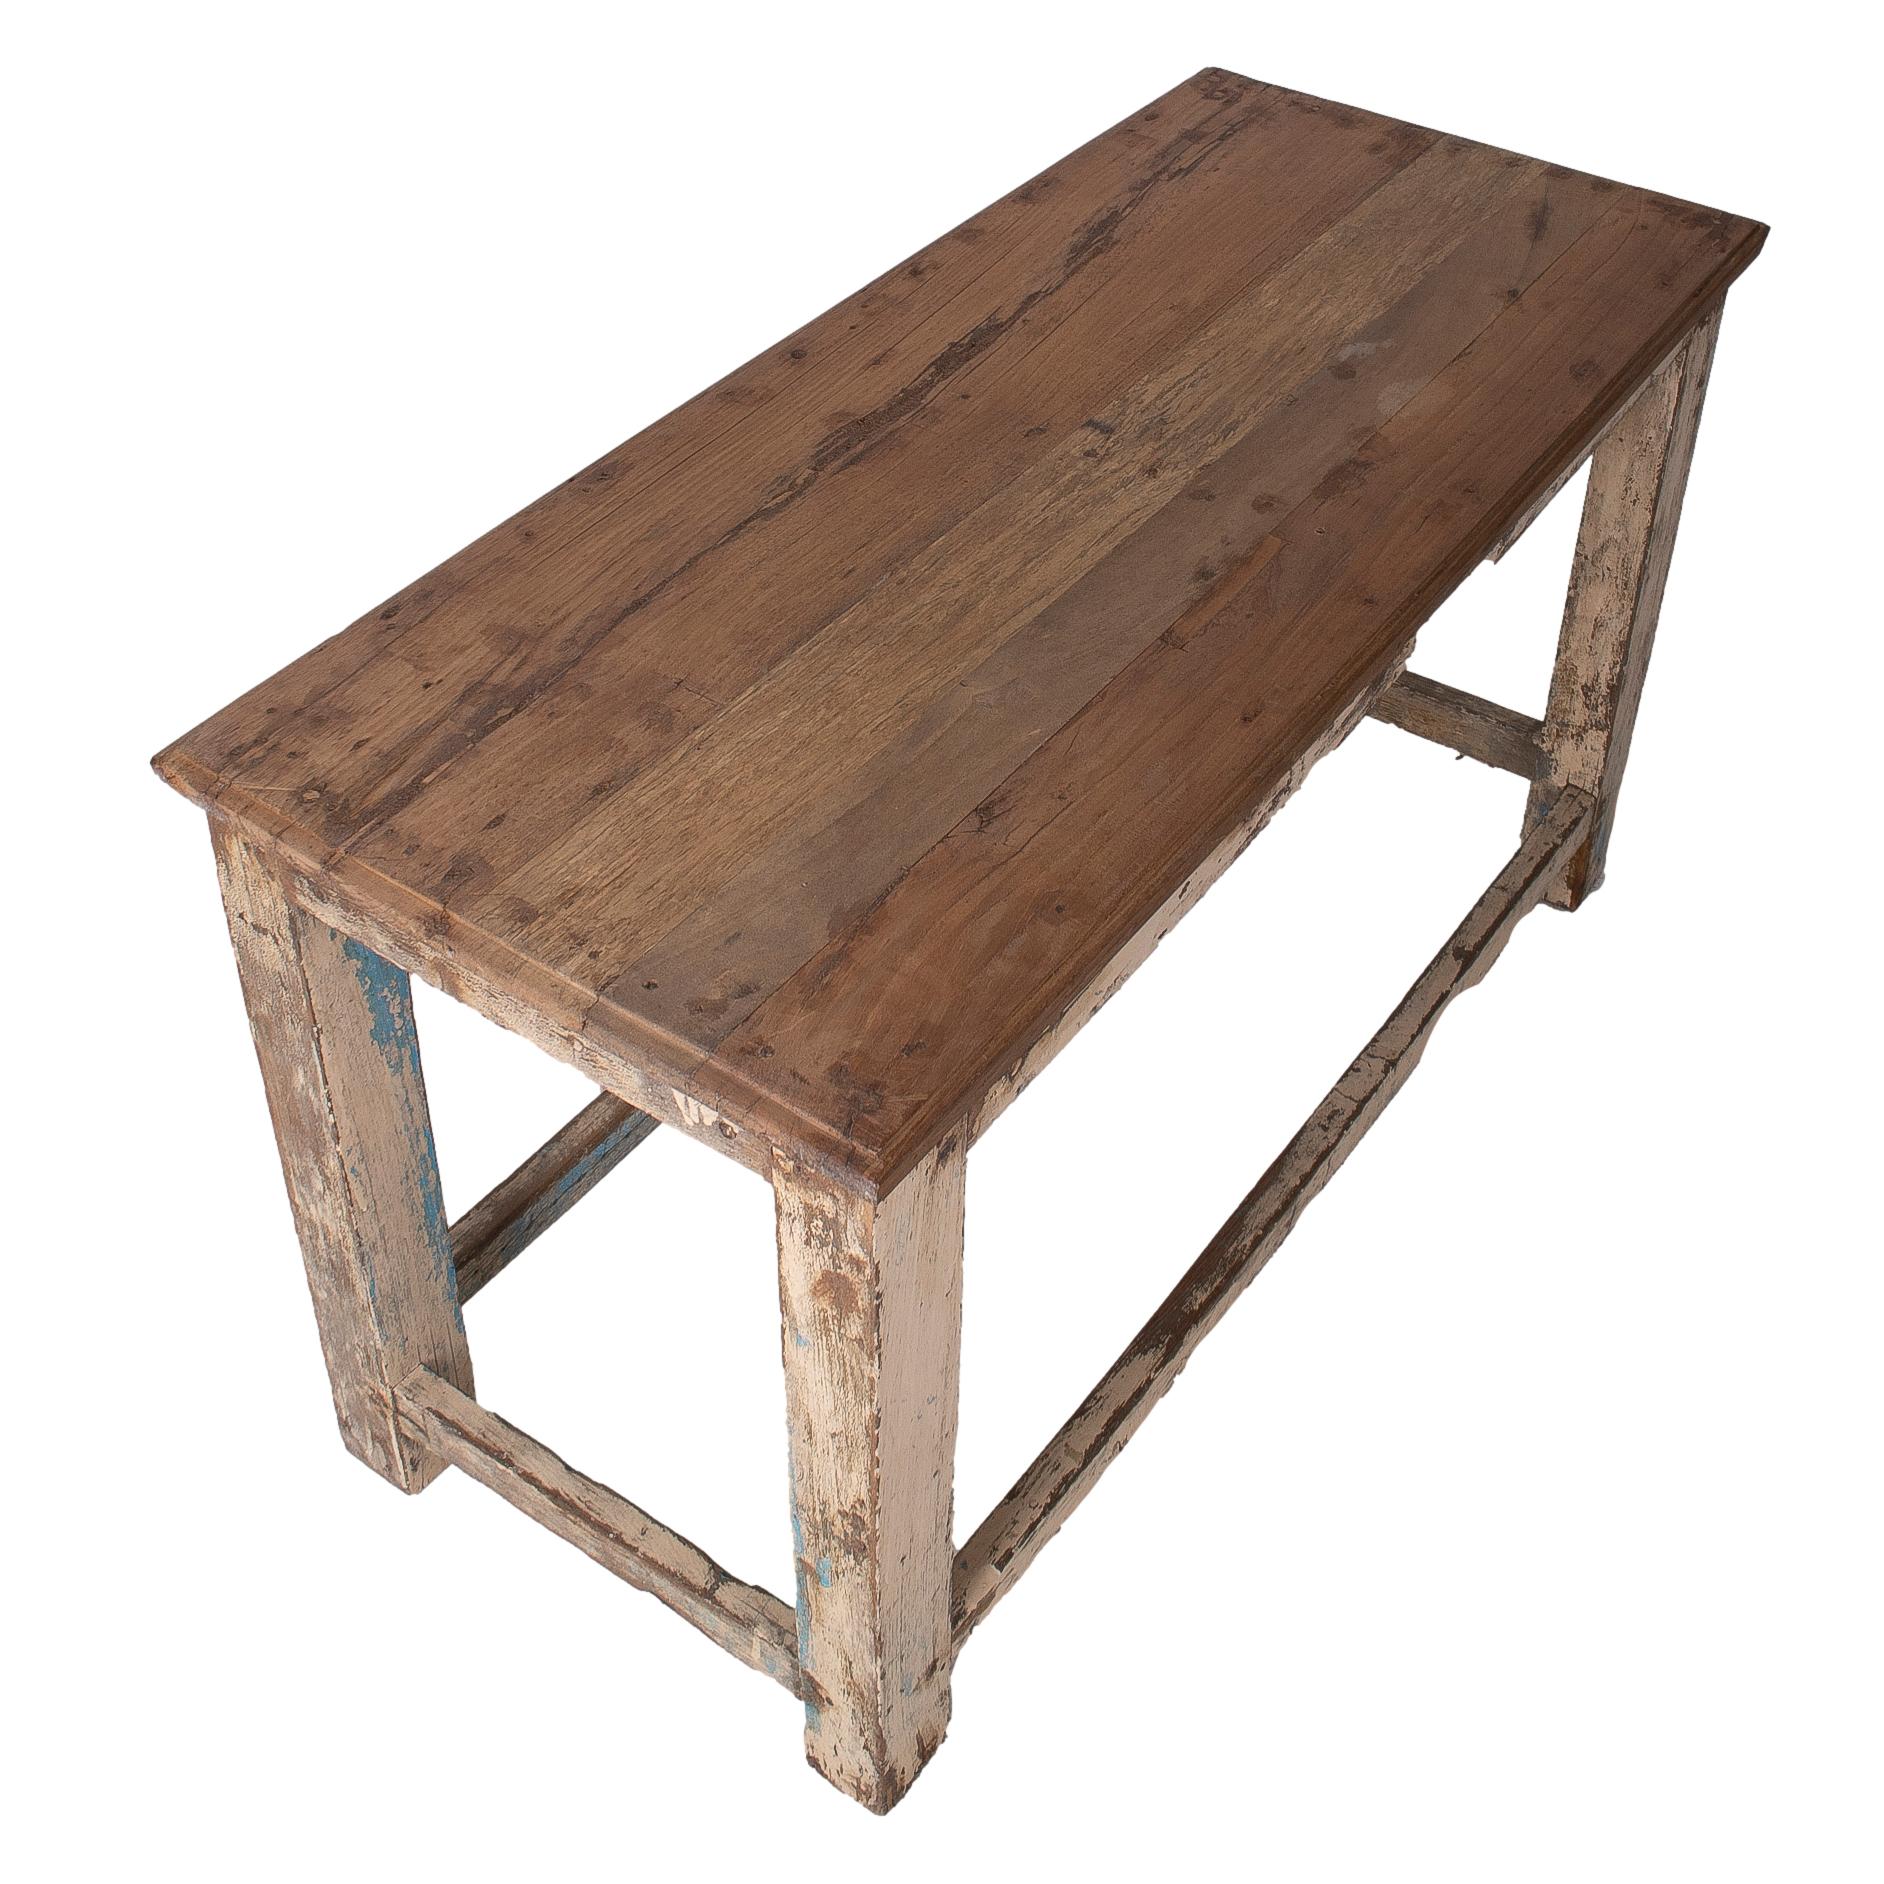 1970s Spanish Industrial Washed Wood Table w/ Crossbeam Legs For Sale 1